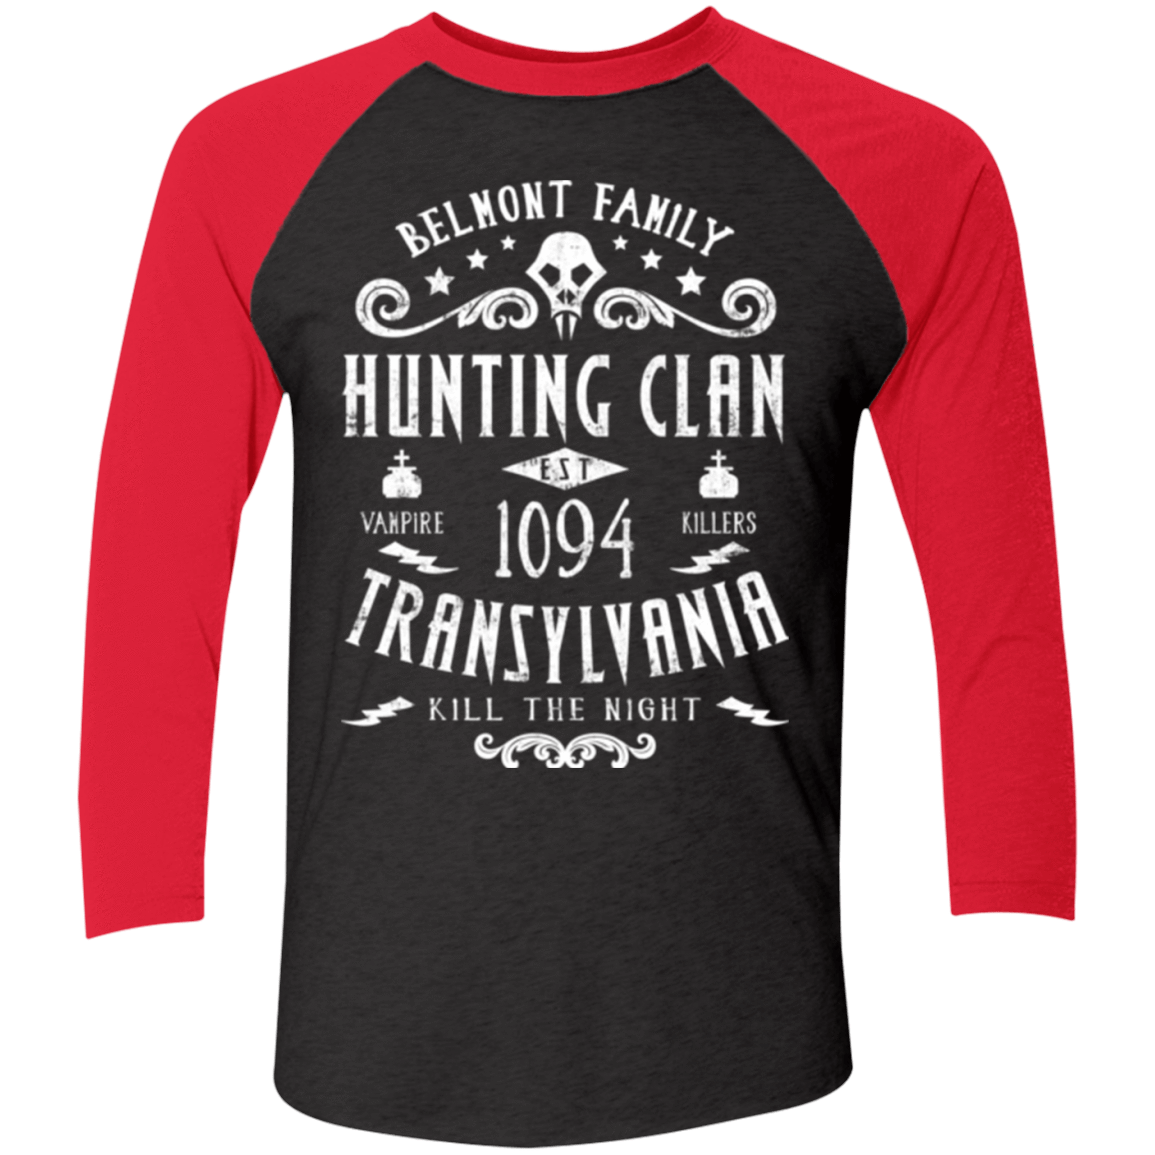 T-Shirts Vintage Black/Vintage Red / X-Small Hunting Clan Men's Triblend 3/4 Sleeve